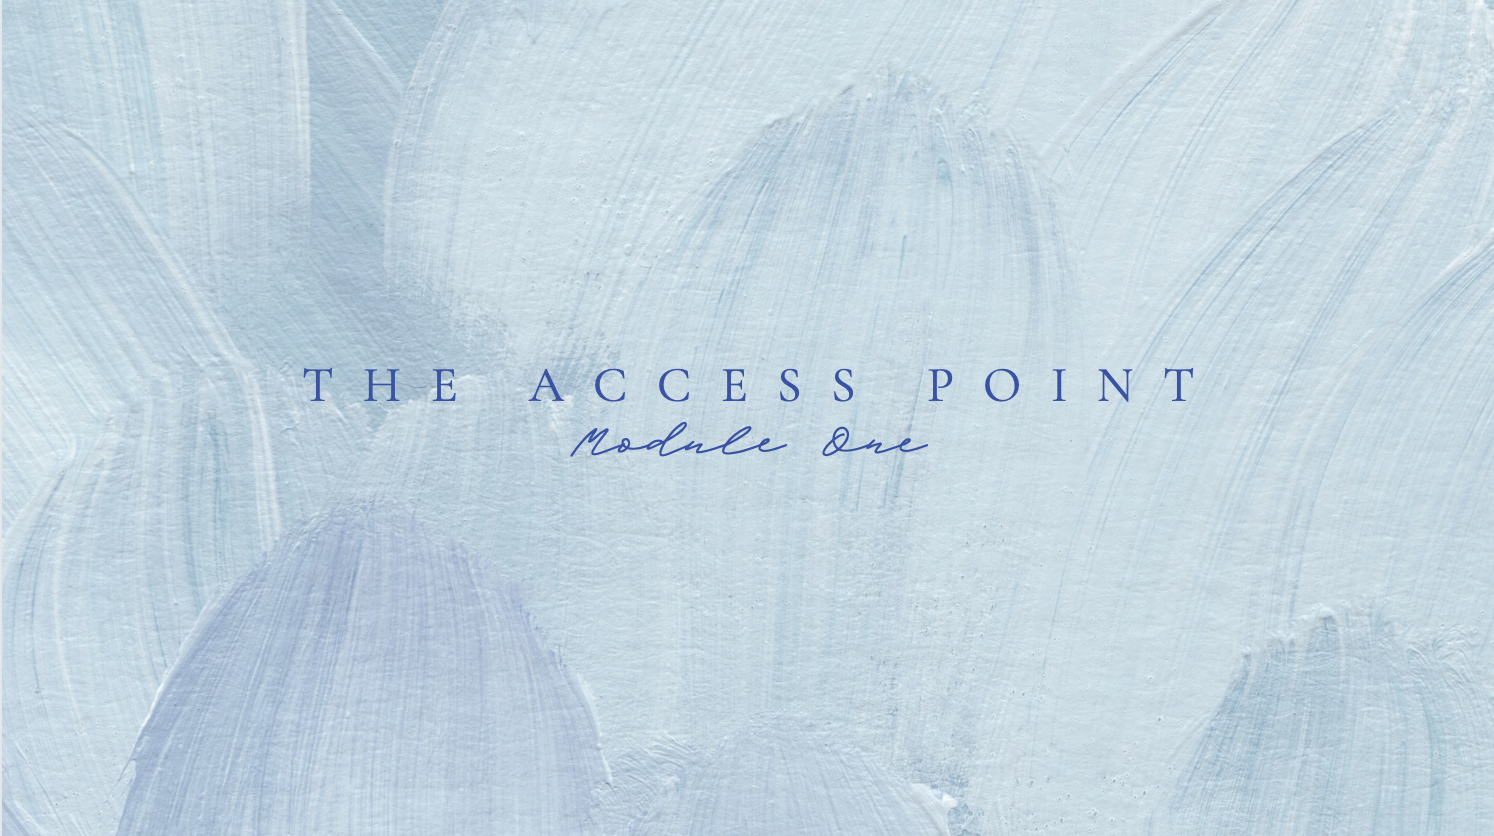 The Access Point